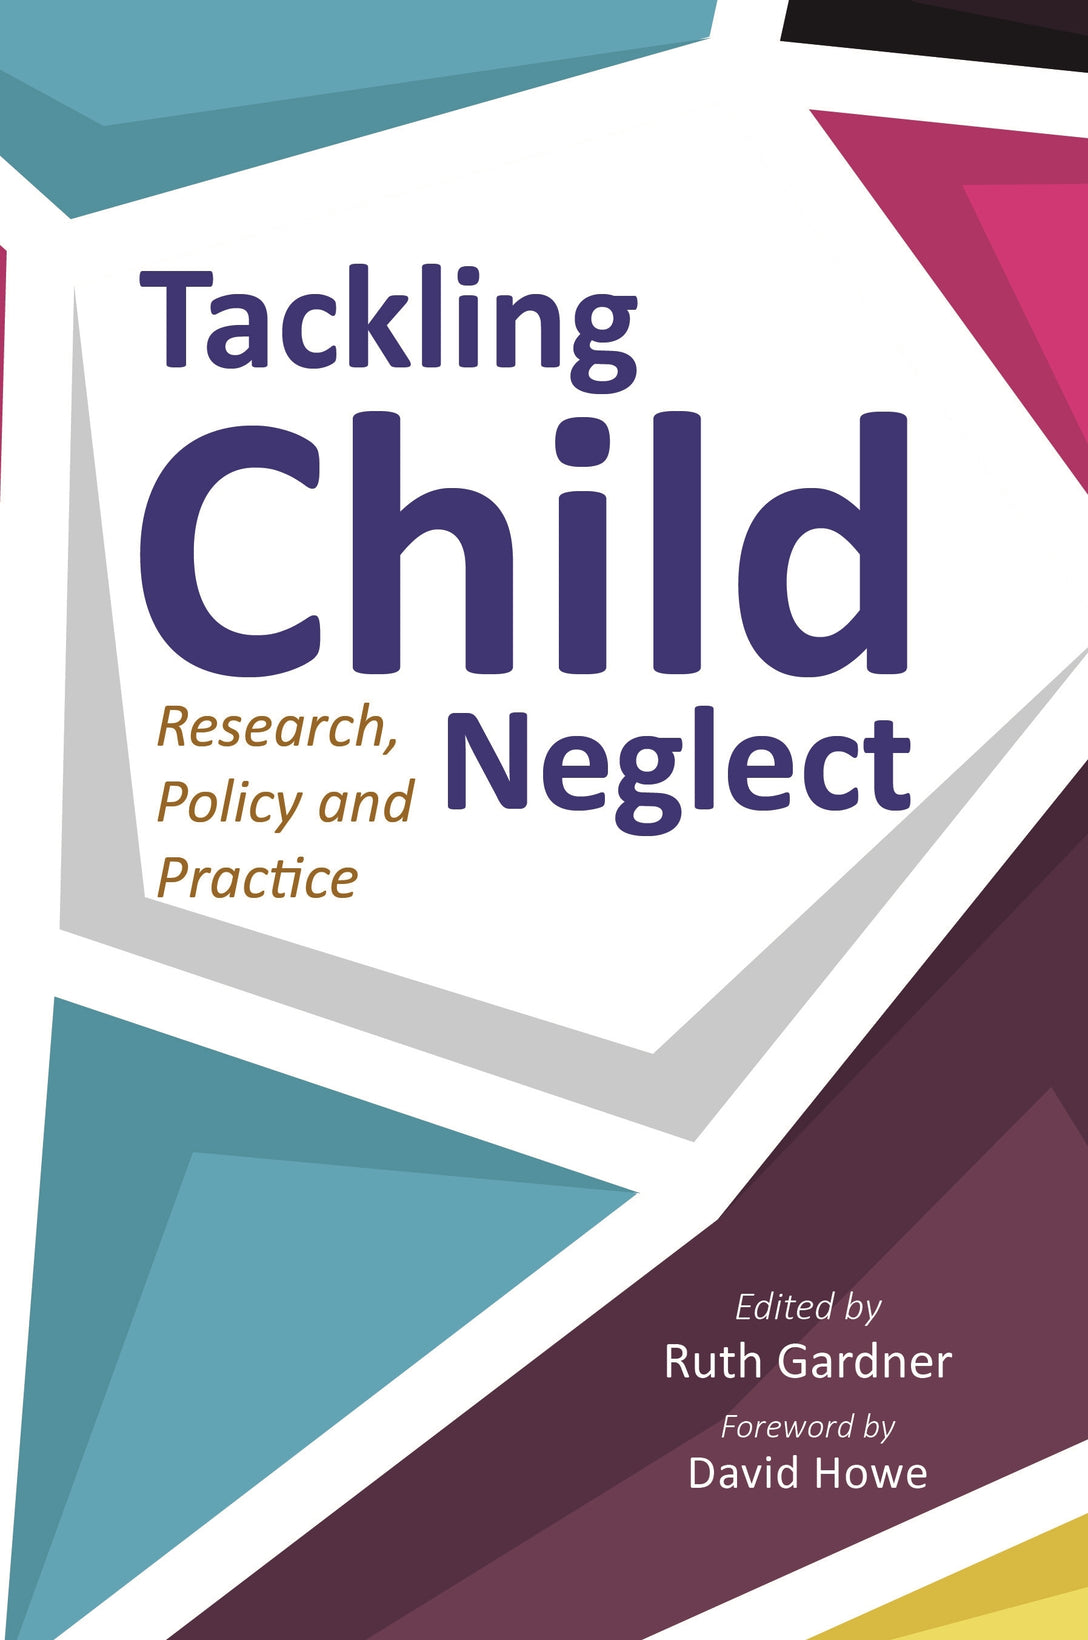 Tackling Child Neglect by Ruth Gardner, David Howe, No Author Listed